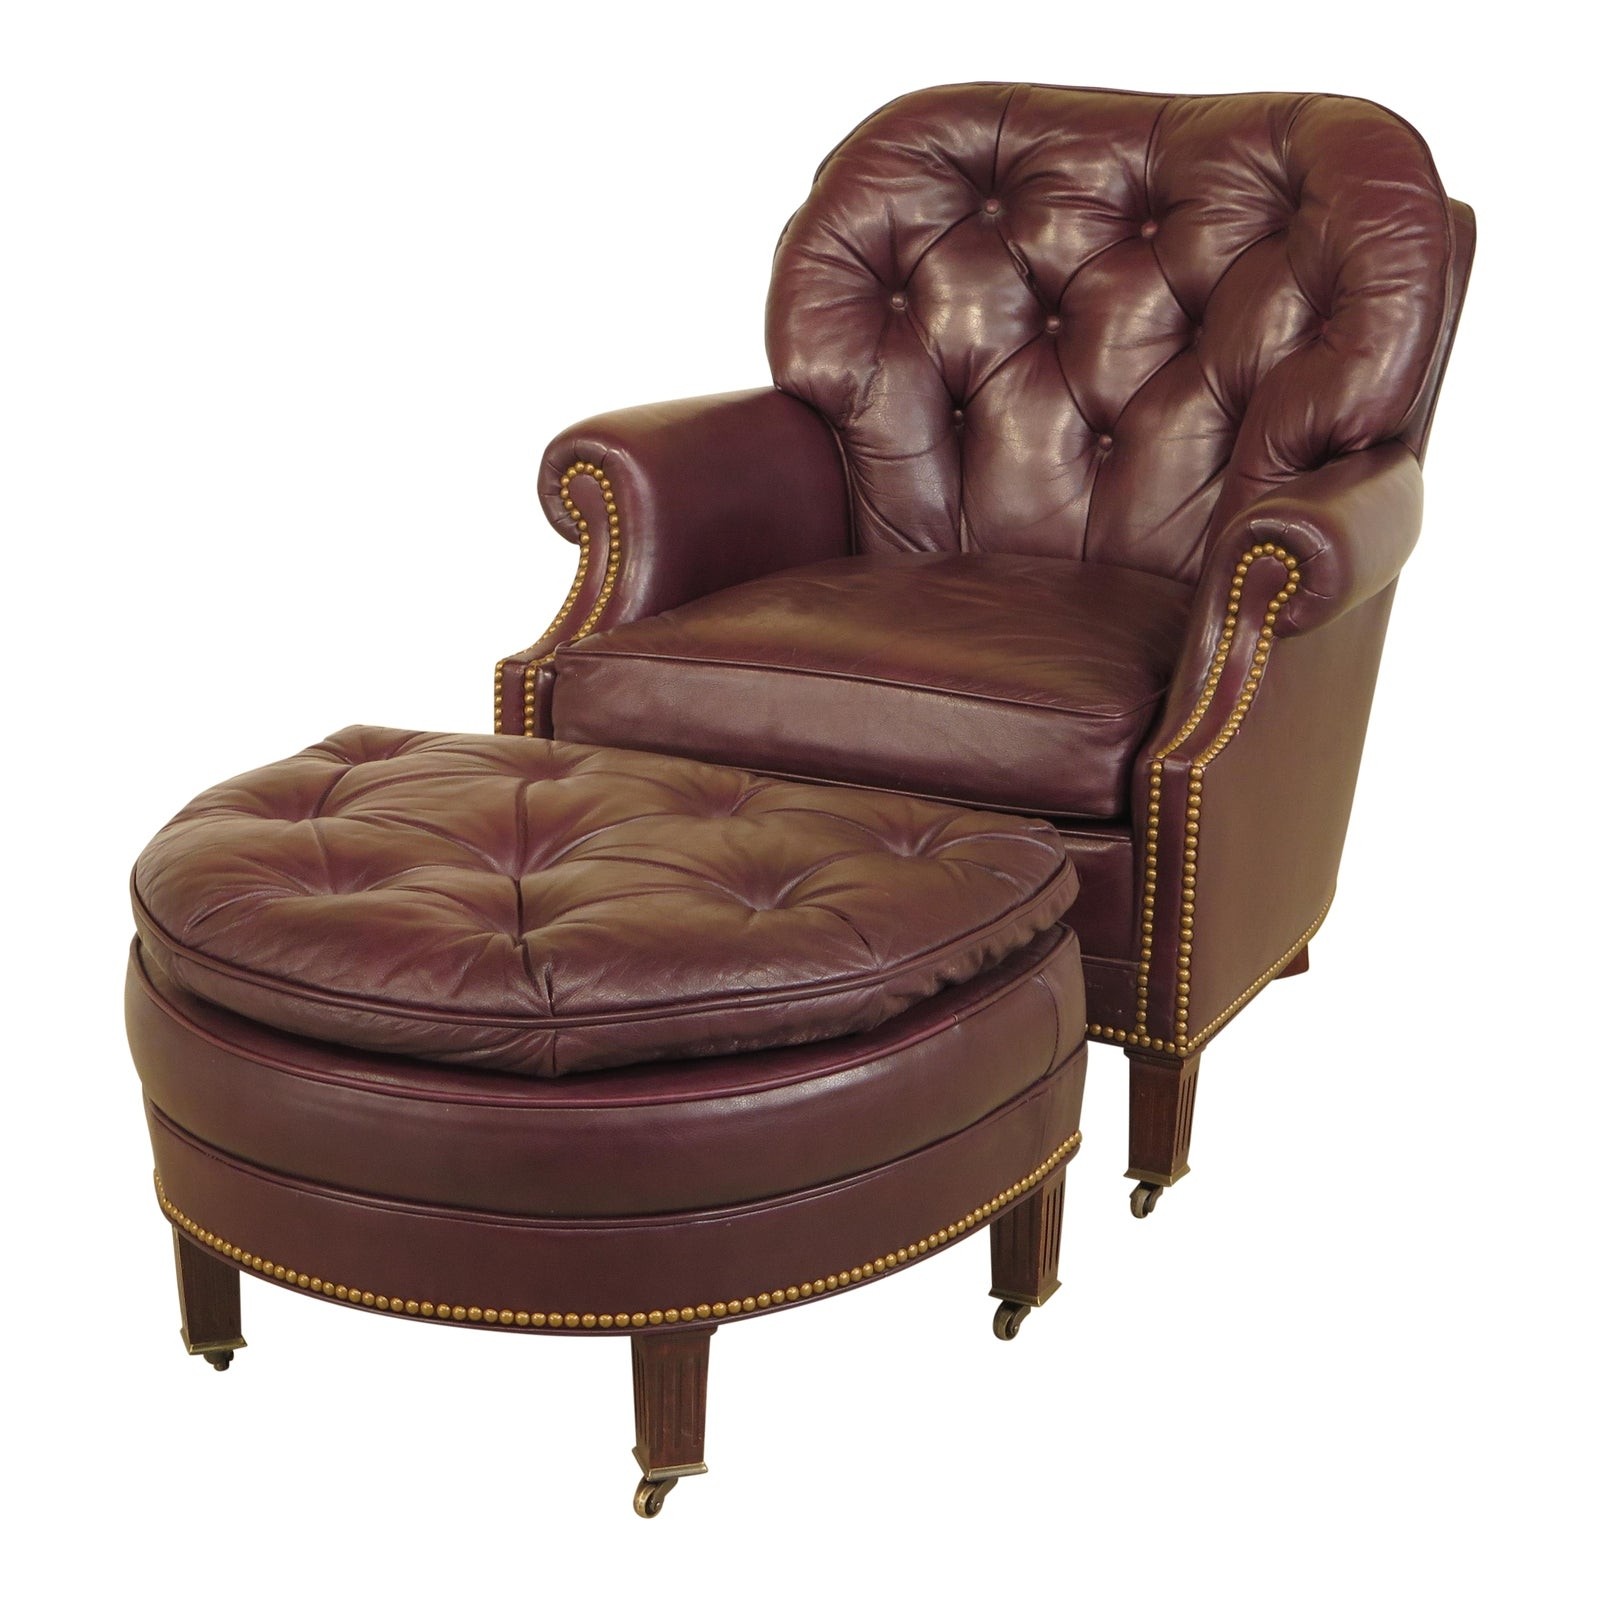 Leather Chairs And Ottomans Ideas On Foter 5025